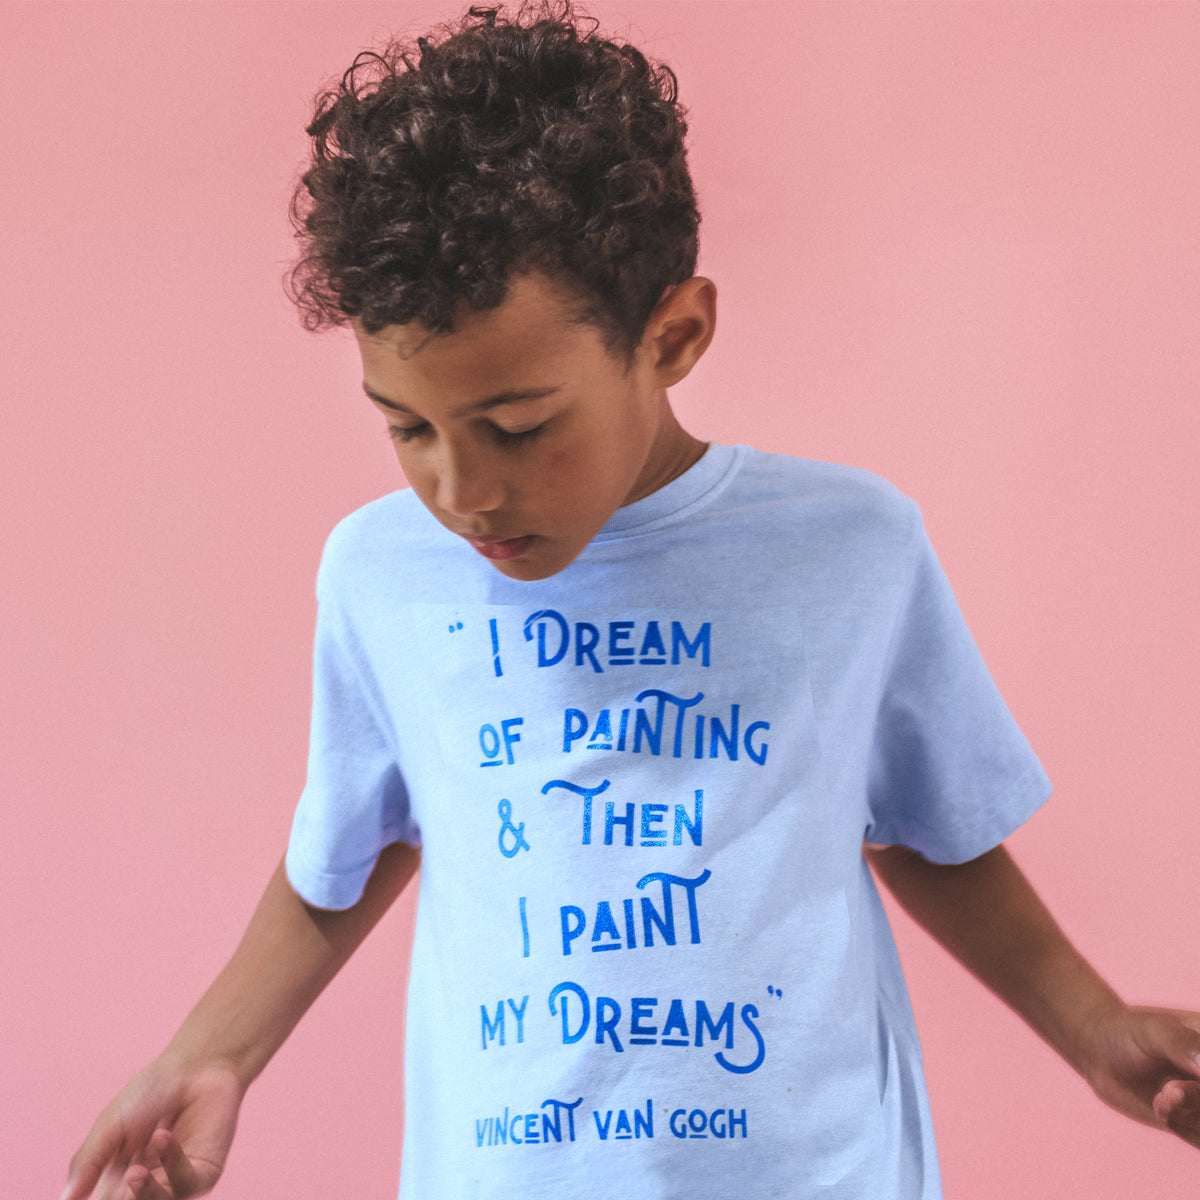 VAN GOGH "I DREAM OF PAINTING..." QUOTE Kids Organic T-Shirt : Mid Blue on Sky Blue